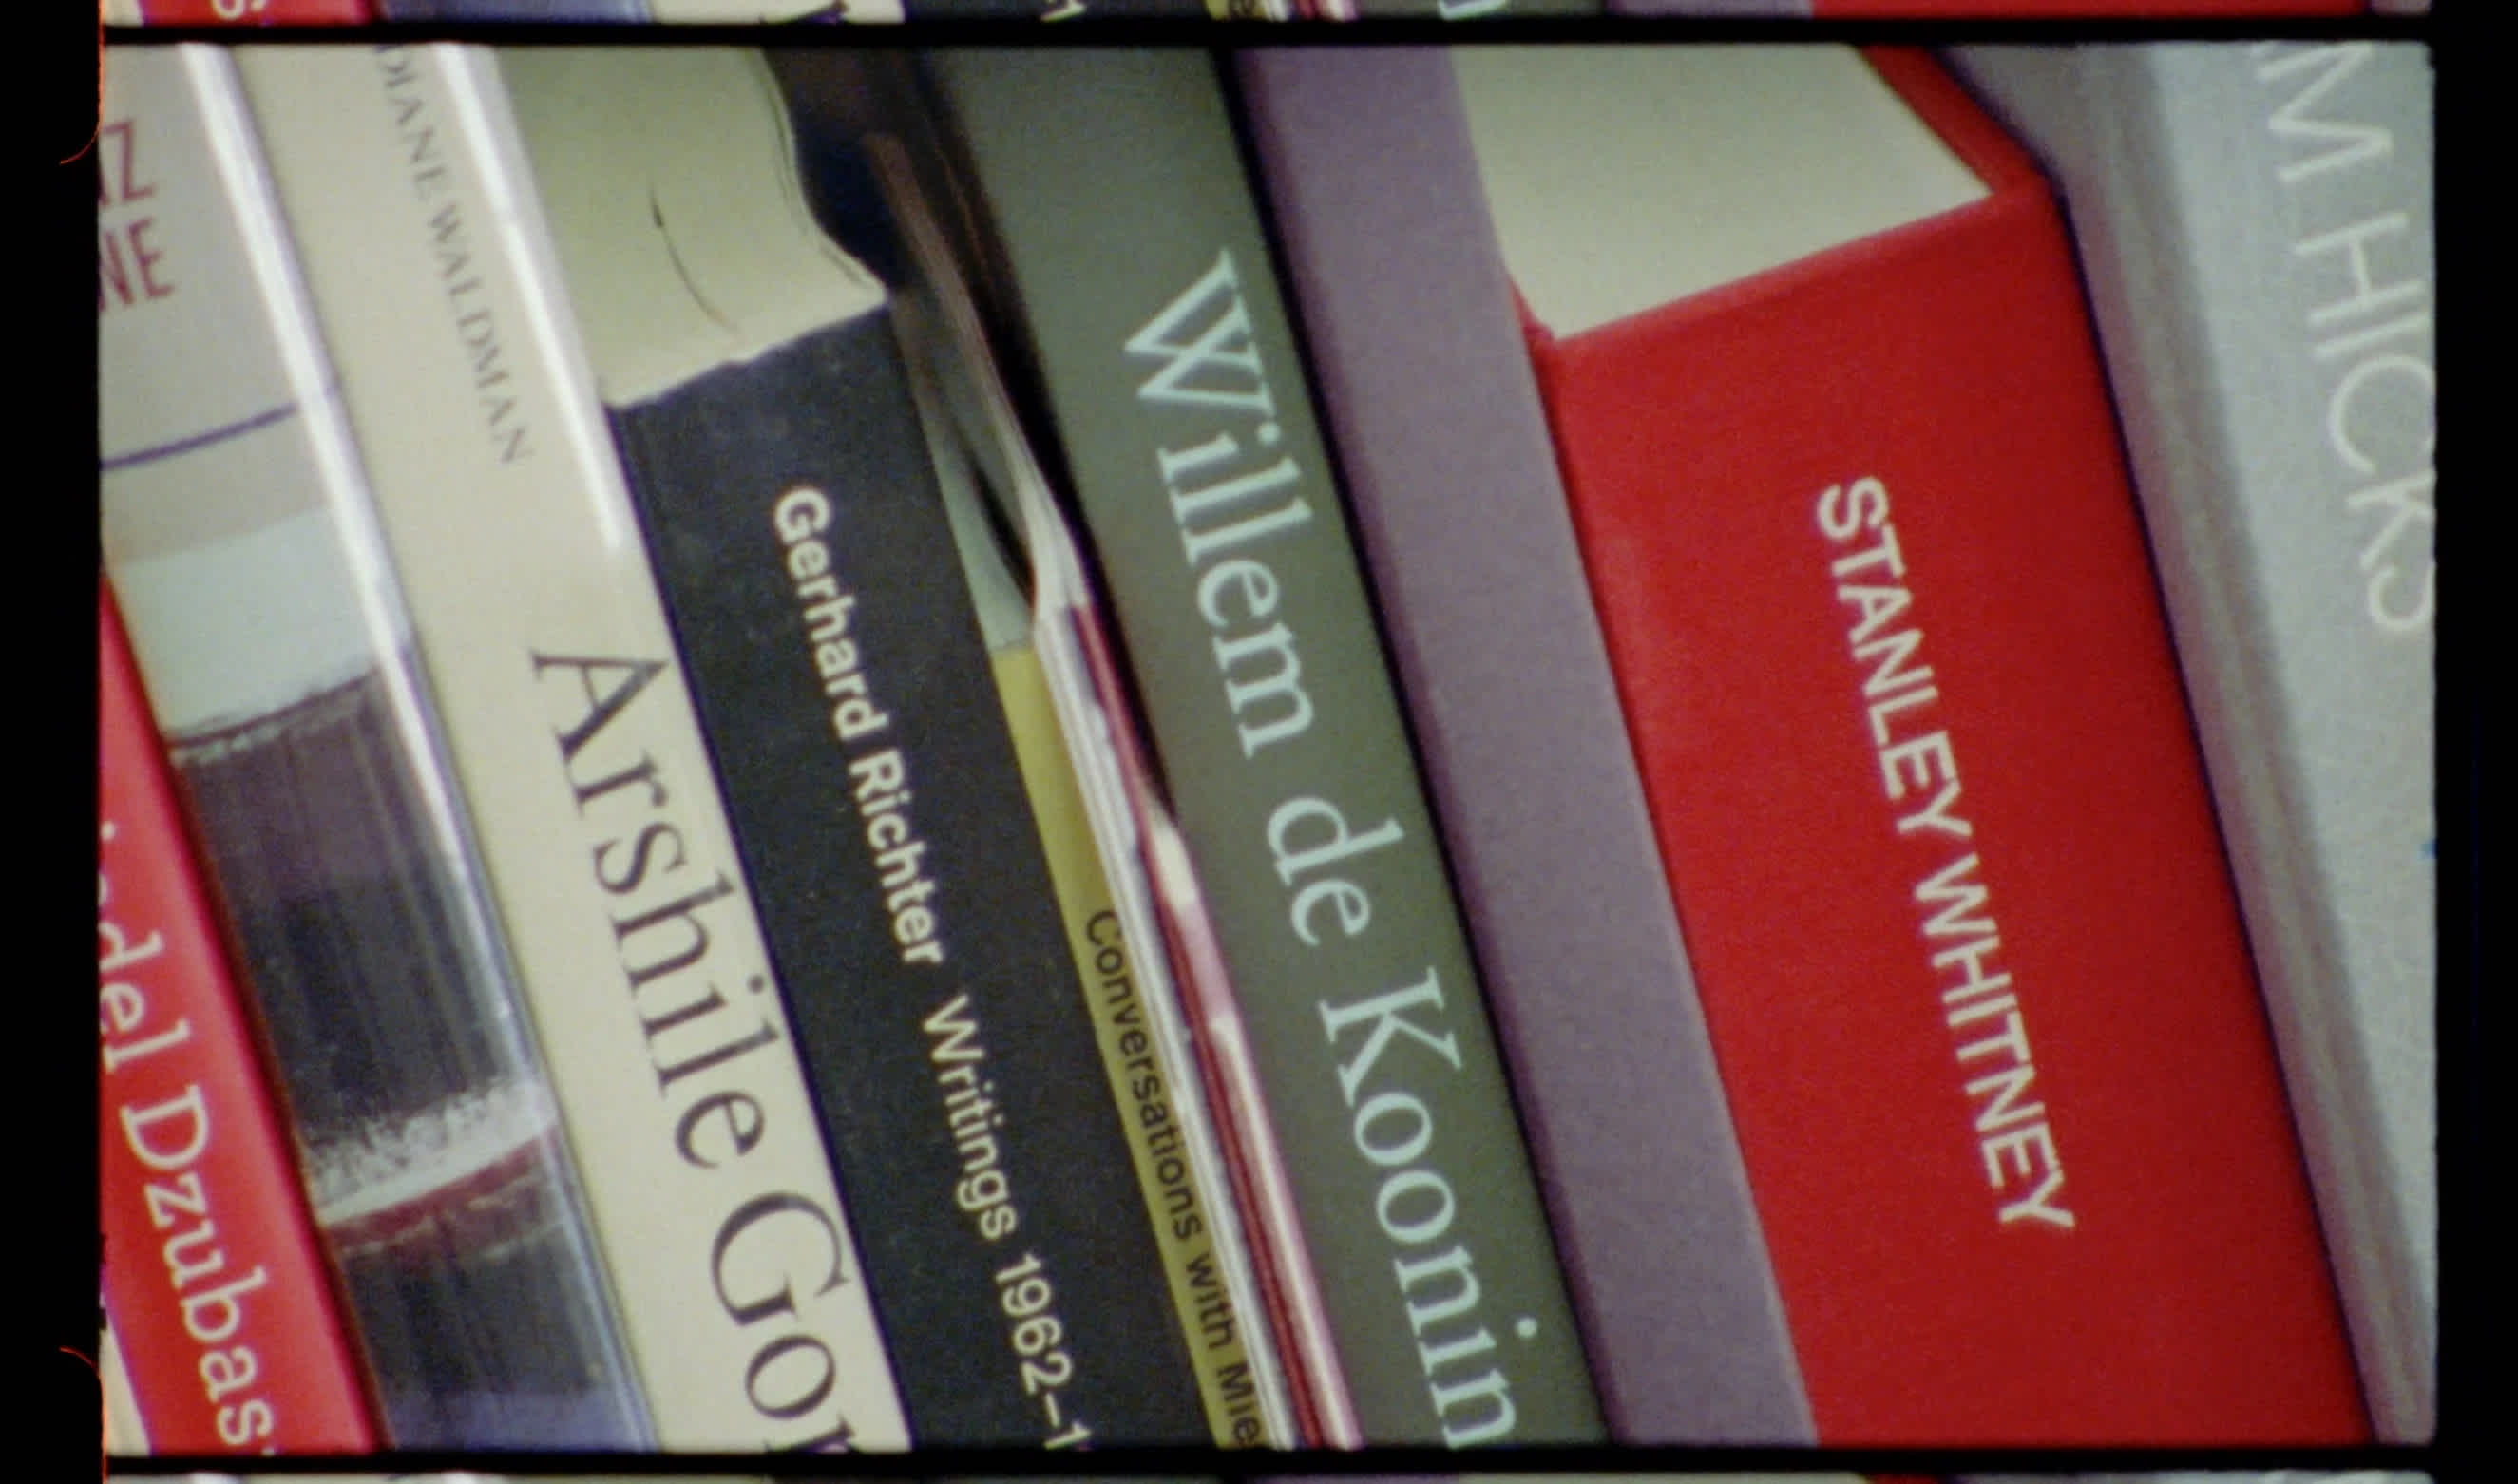 Close up of a row of art book spines.